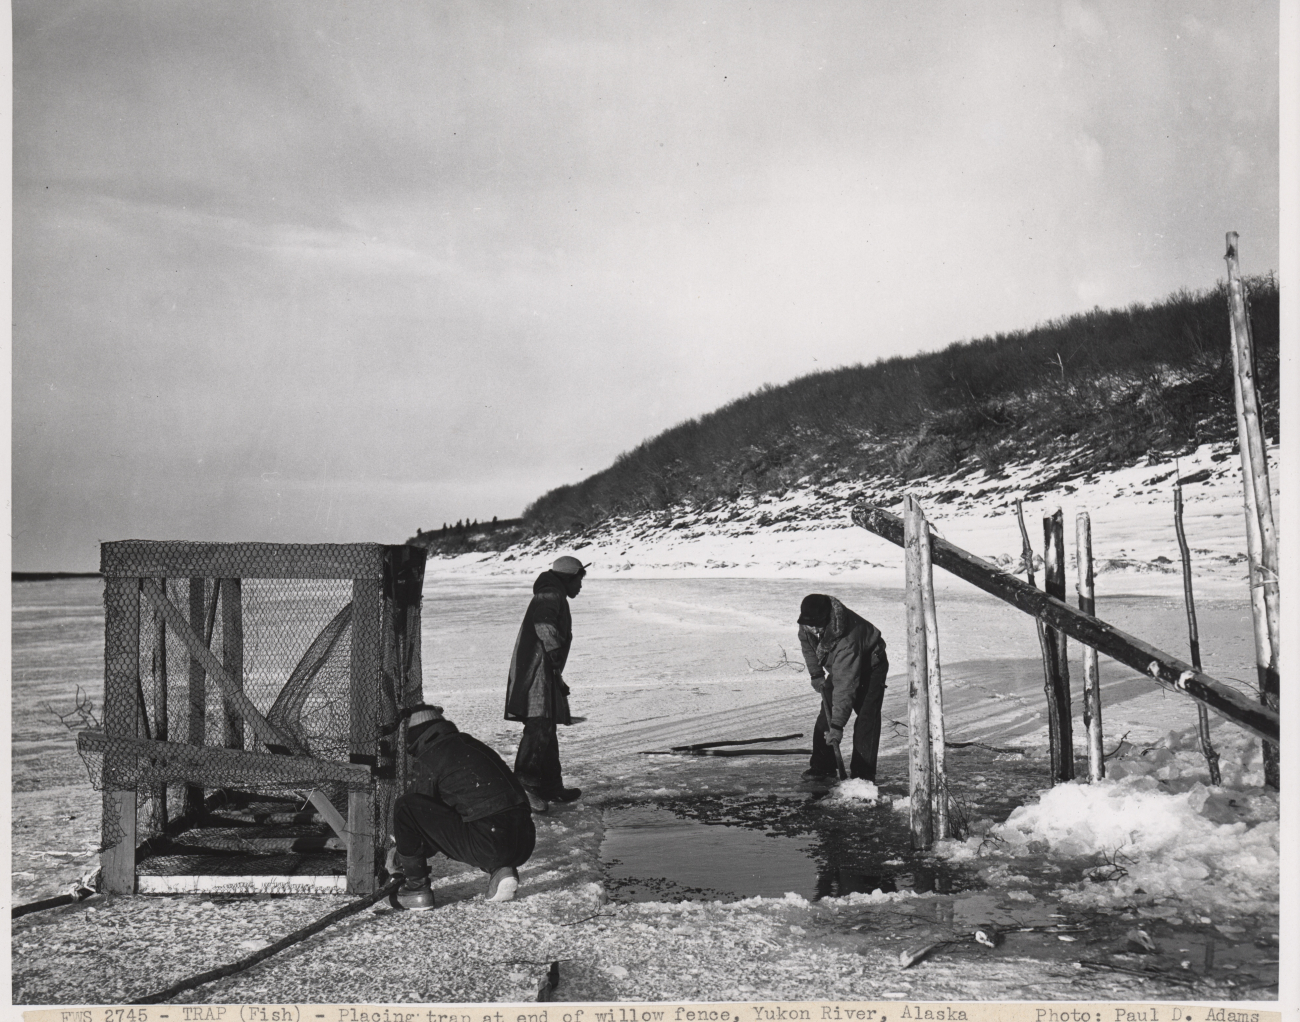 Placing fish trap at end of willow fence on the Yukon River